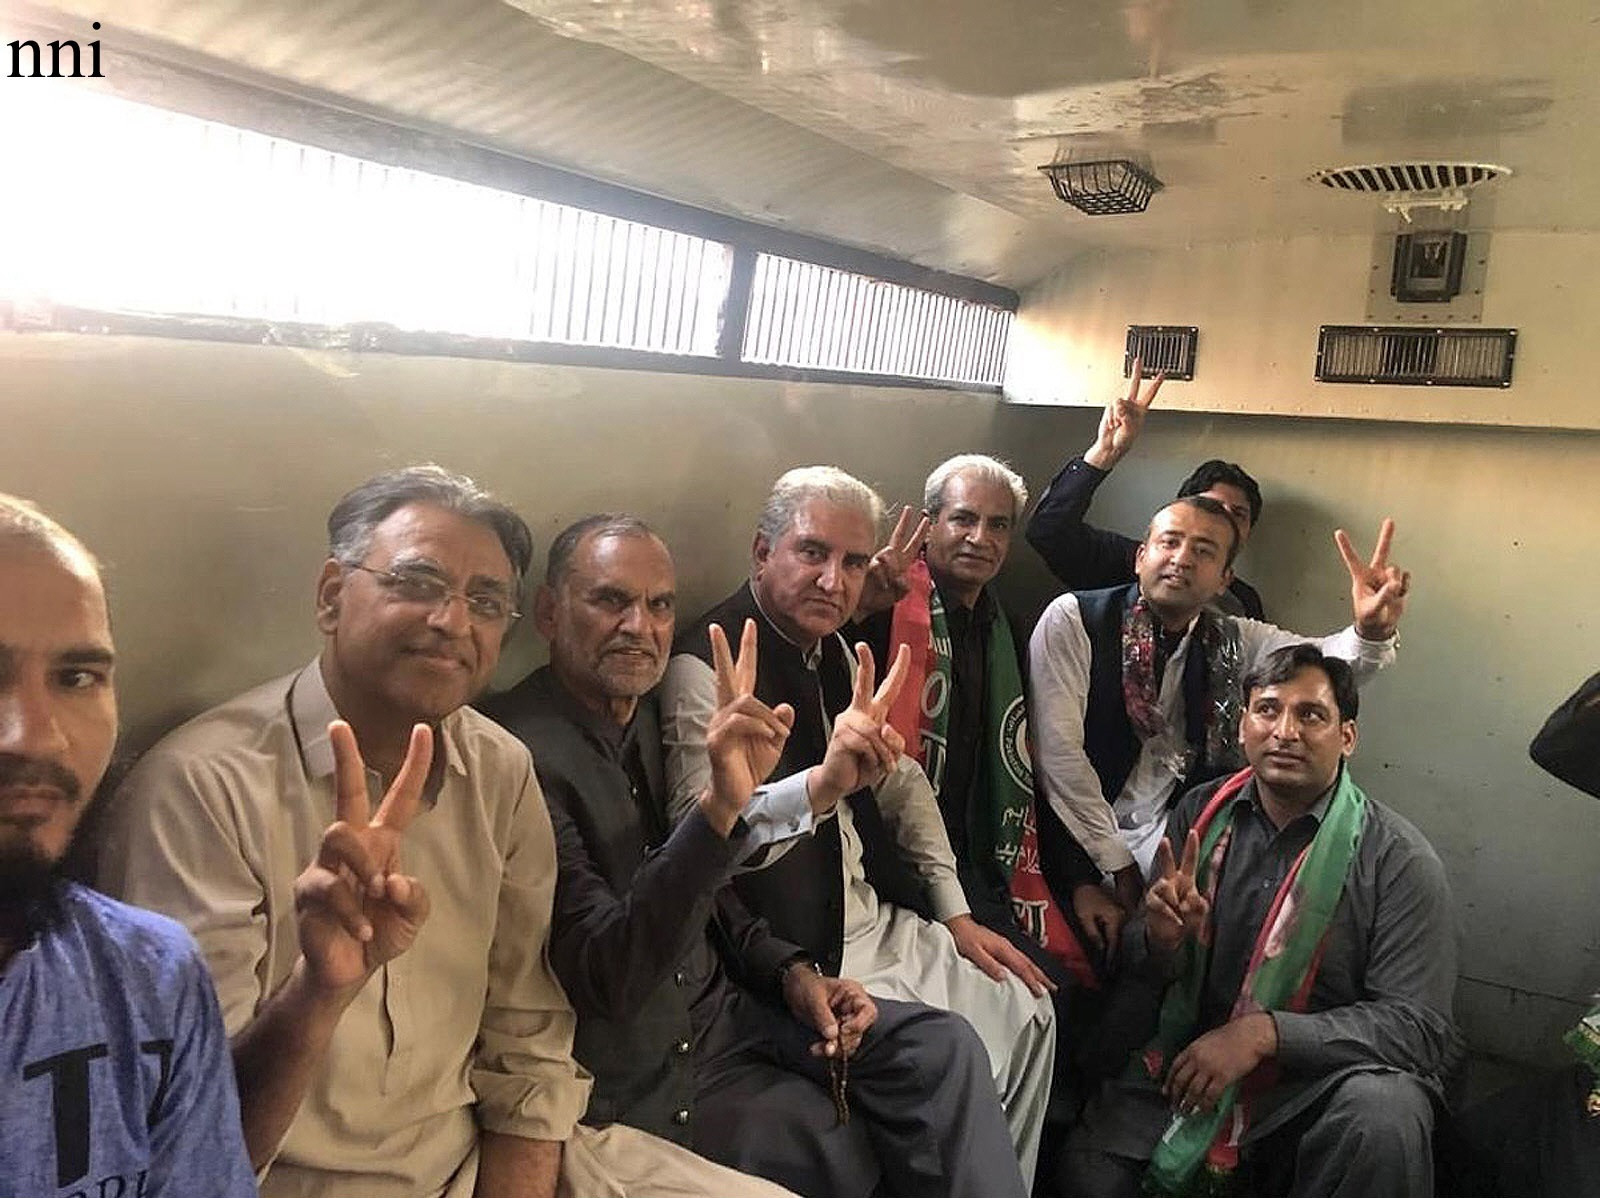 pti leaders shah mahmood qureshi asad umar and others sit in a police van following their arrest in lahore photo nni